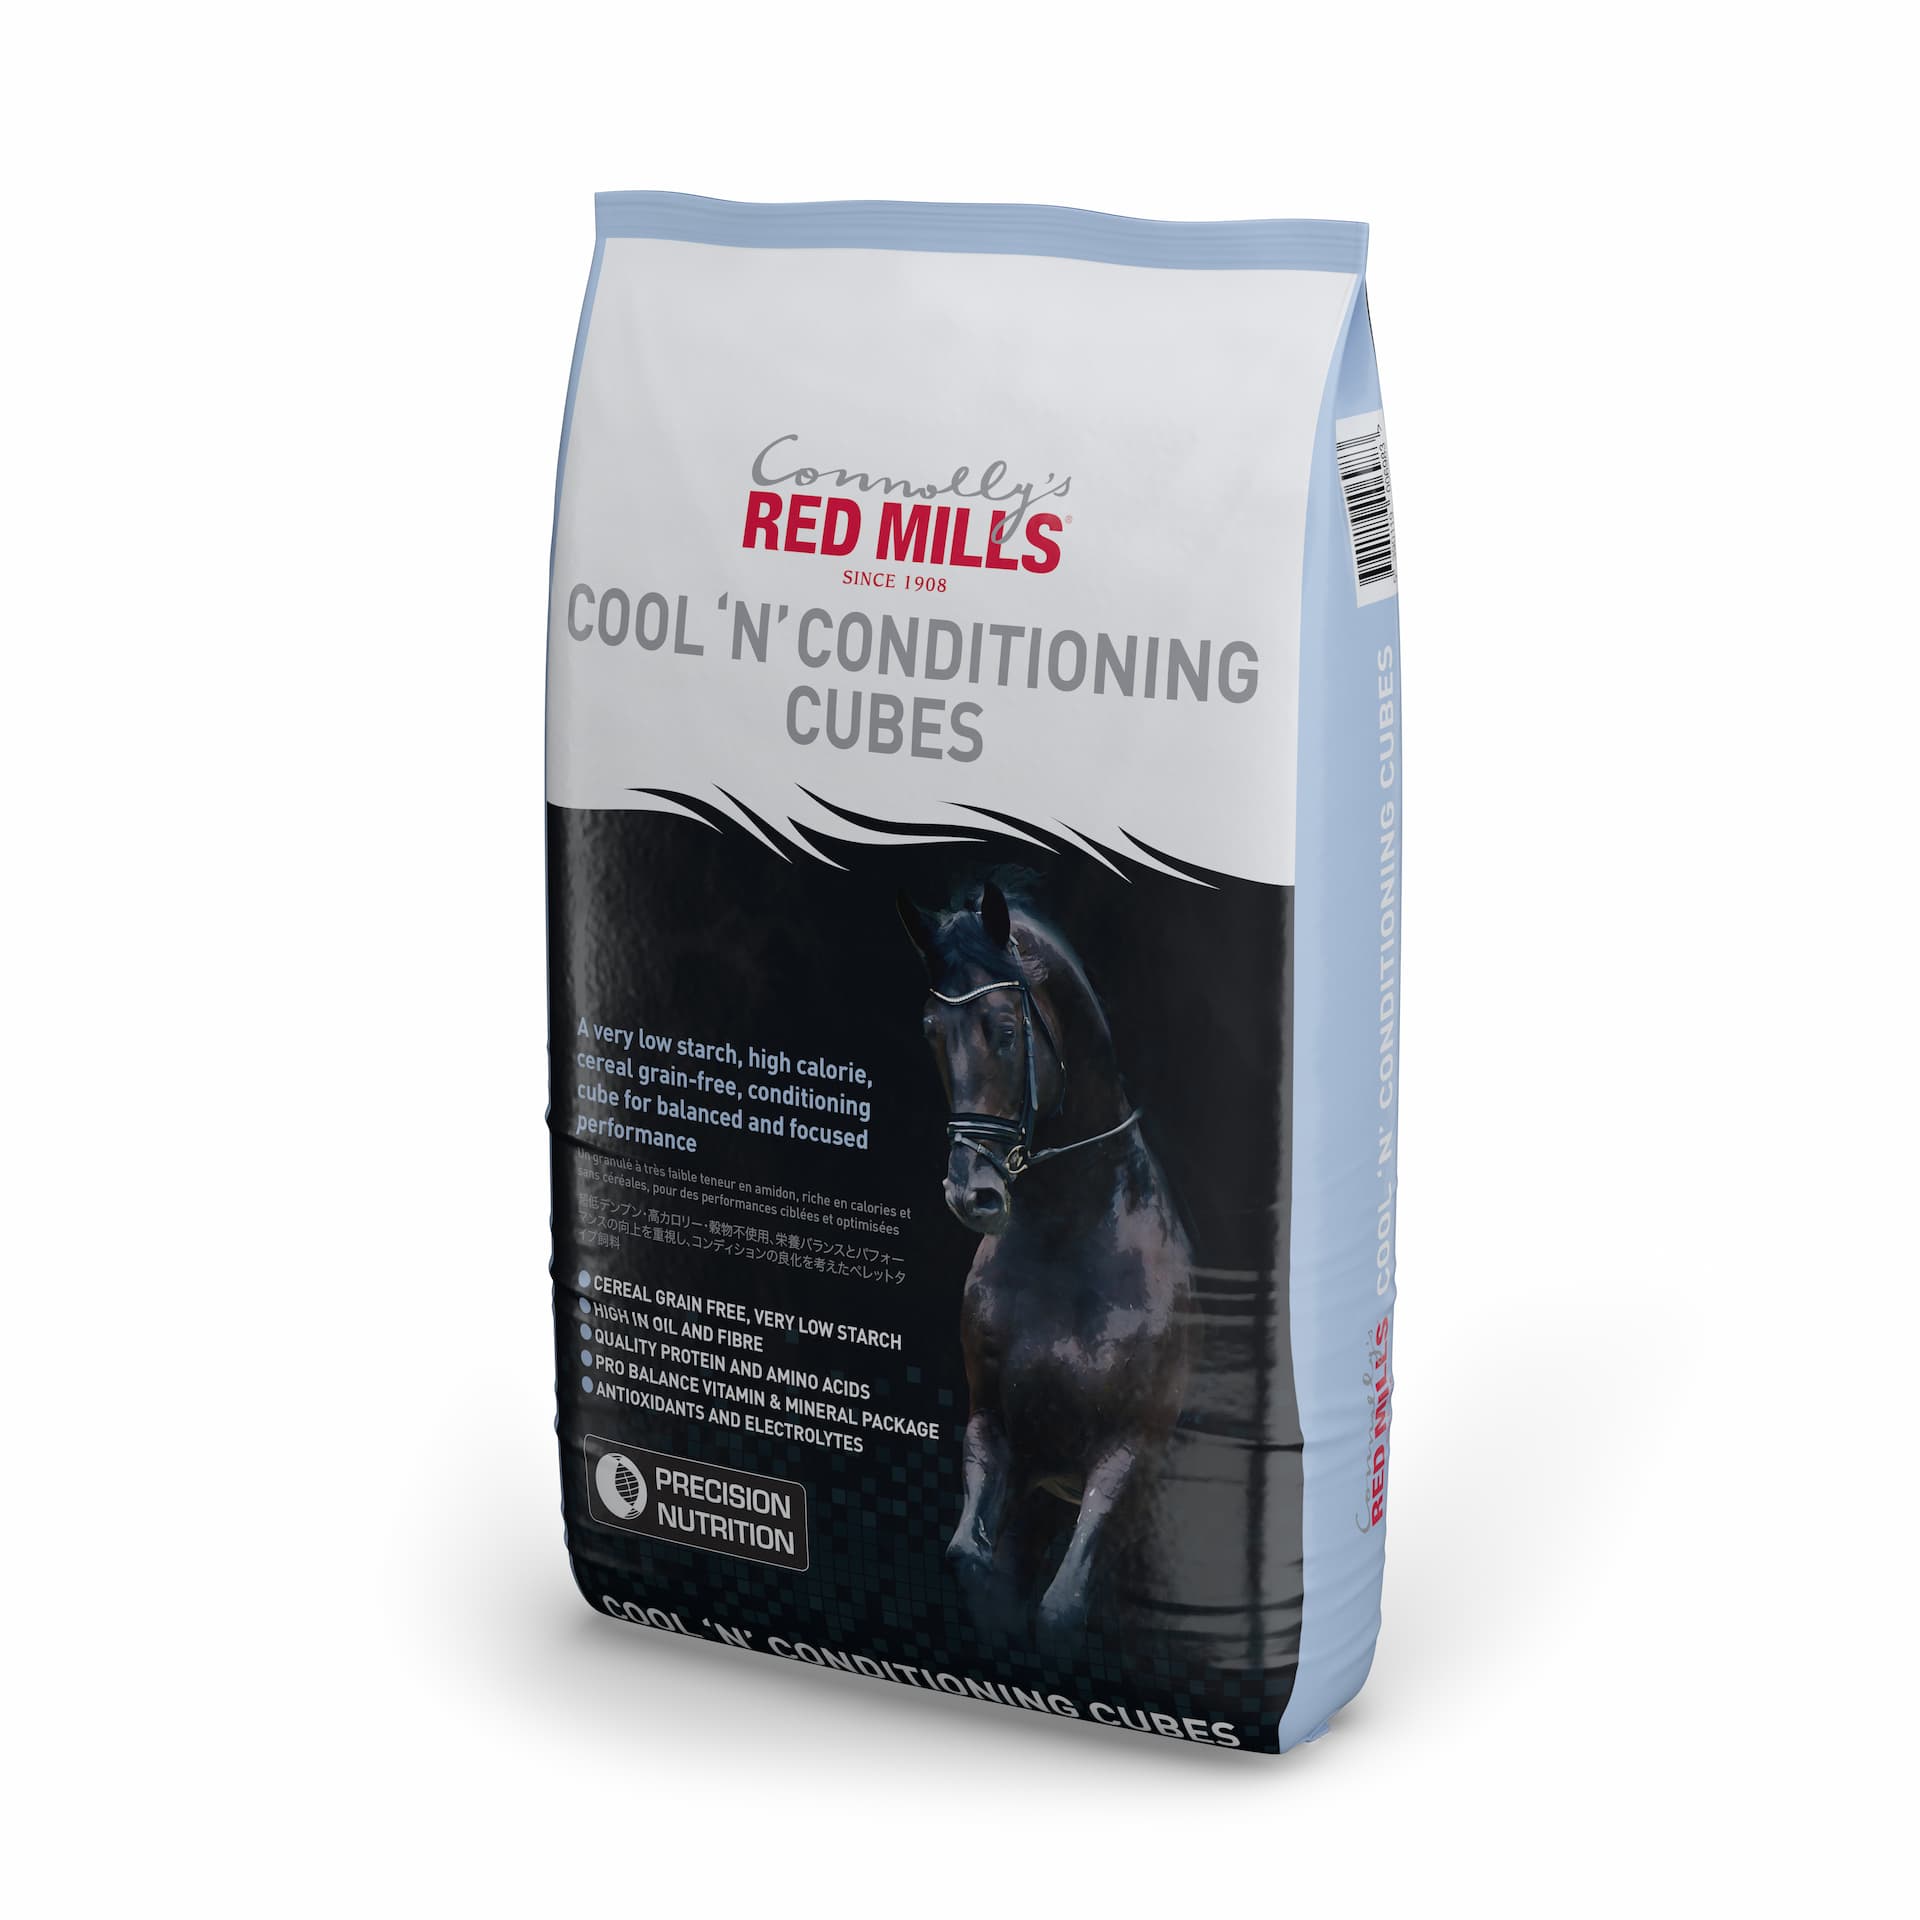 14% Cool ‘N’ Conditioning Cubes